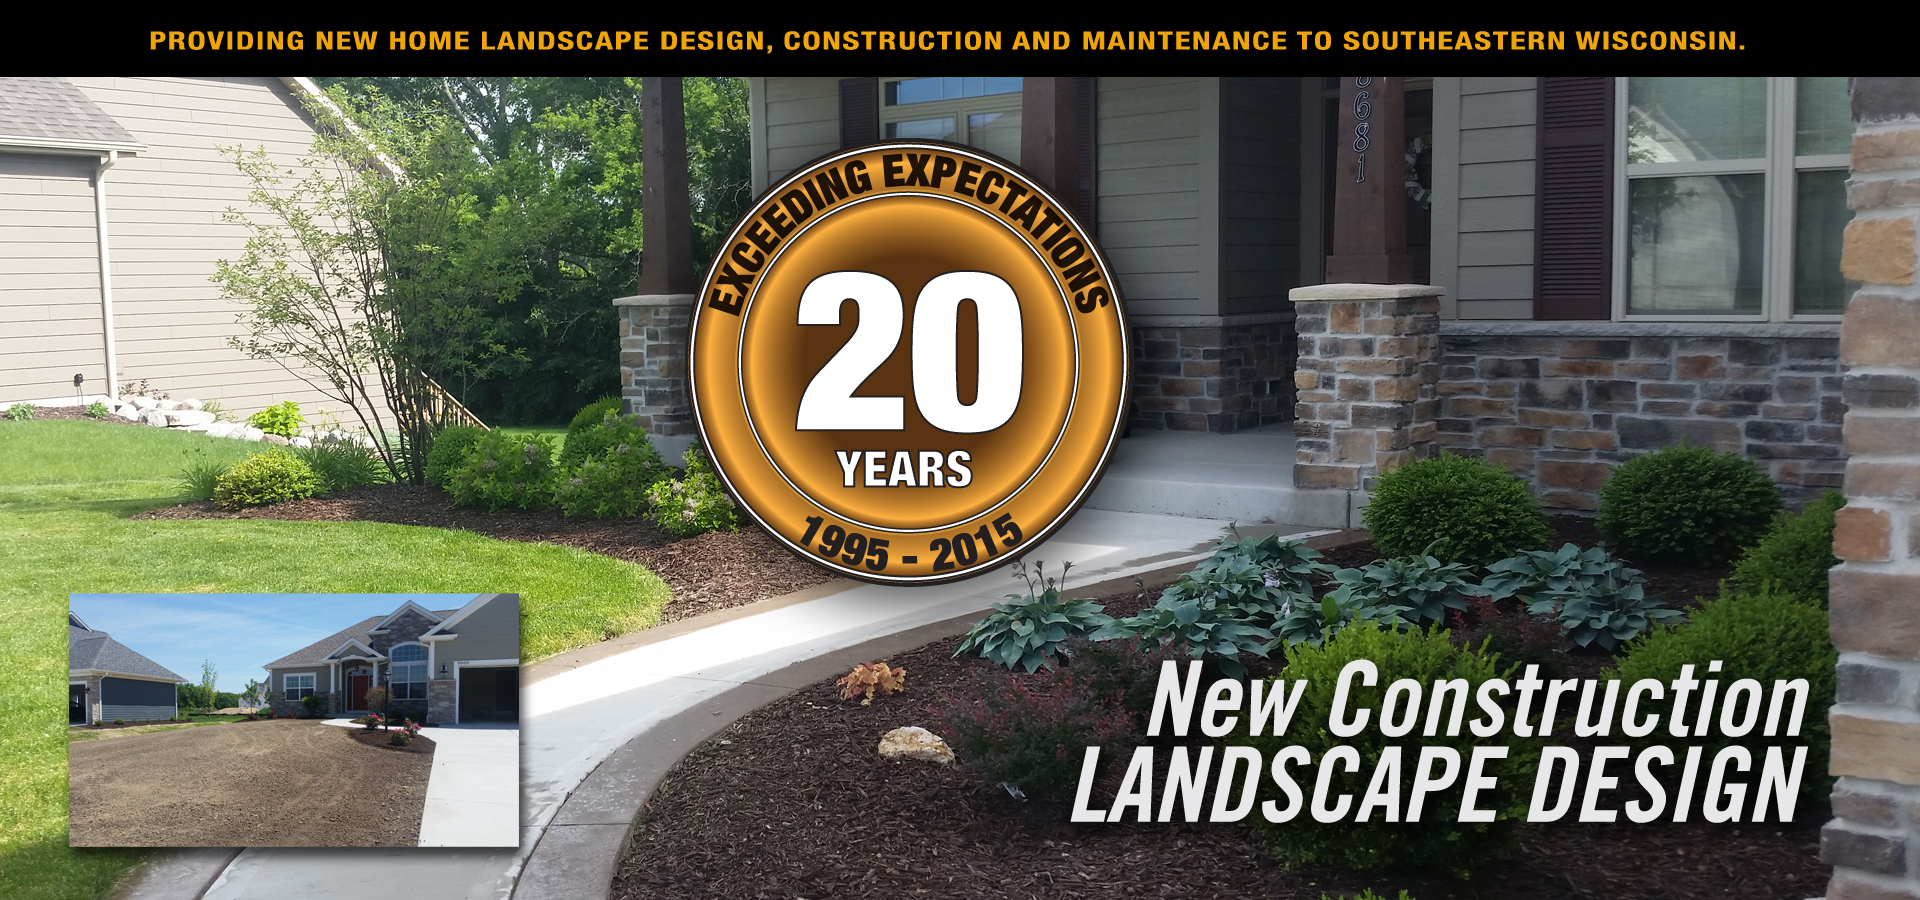 we design and build custom landscaping whether new or existing